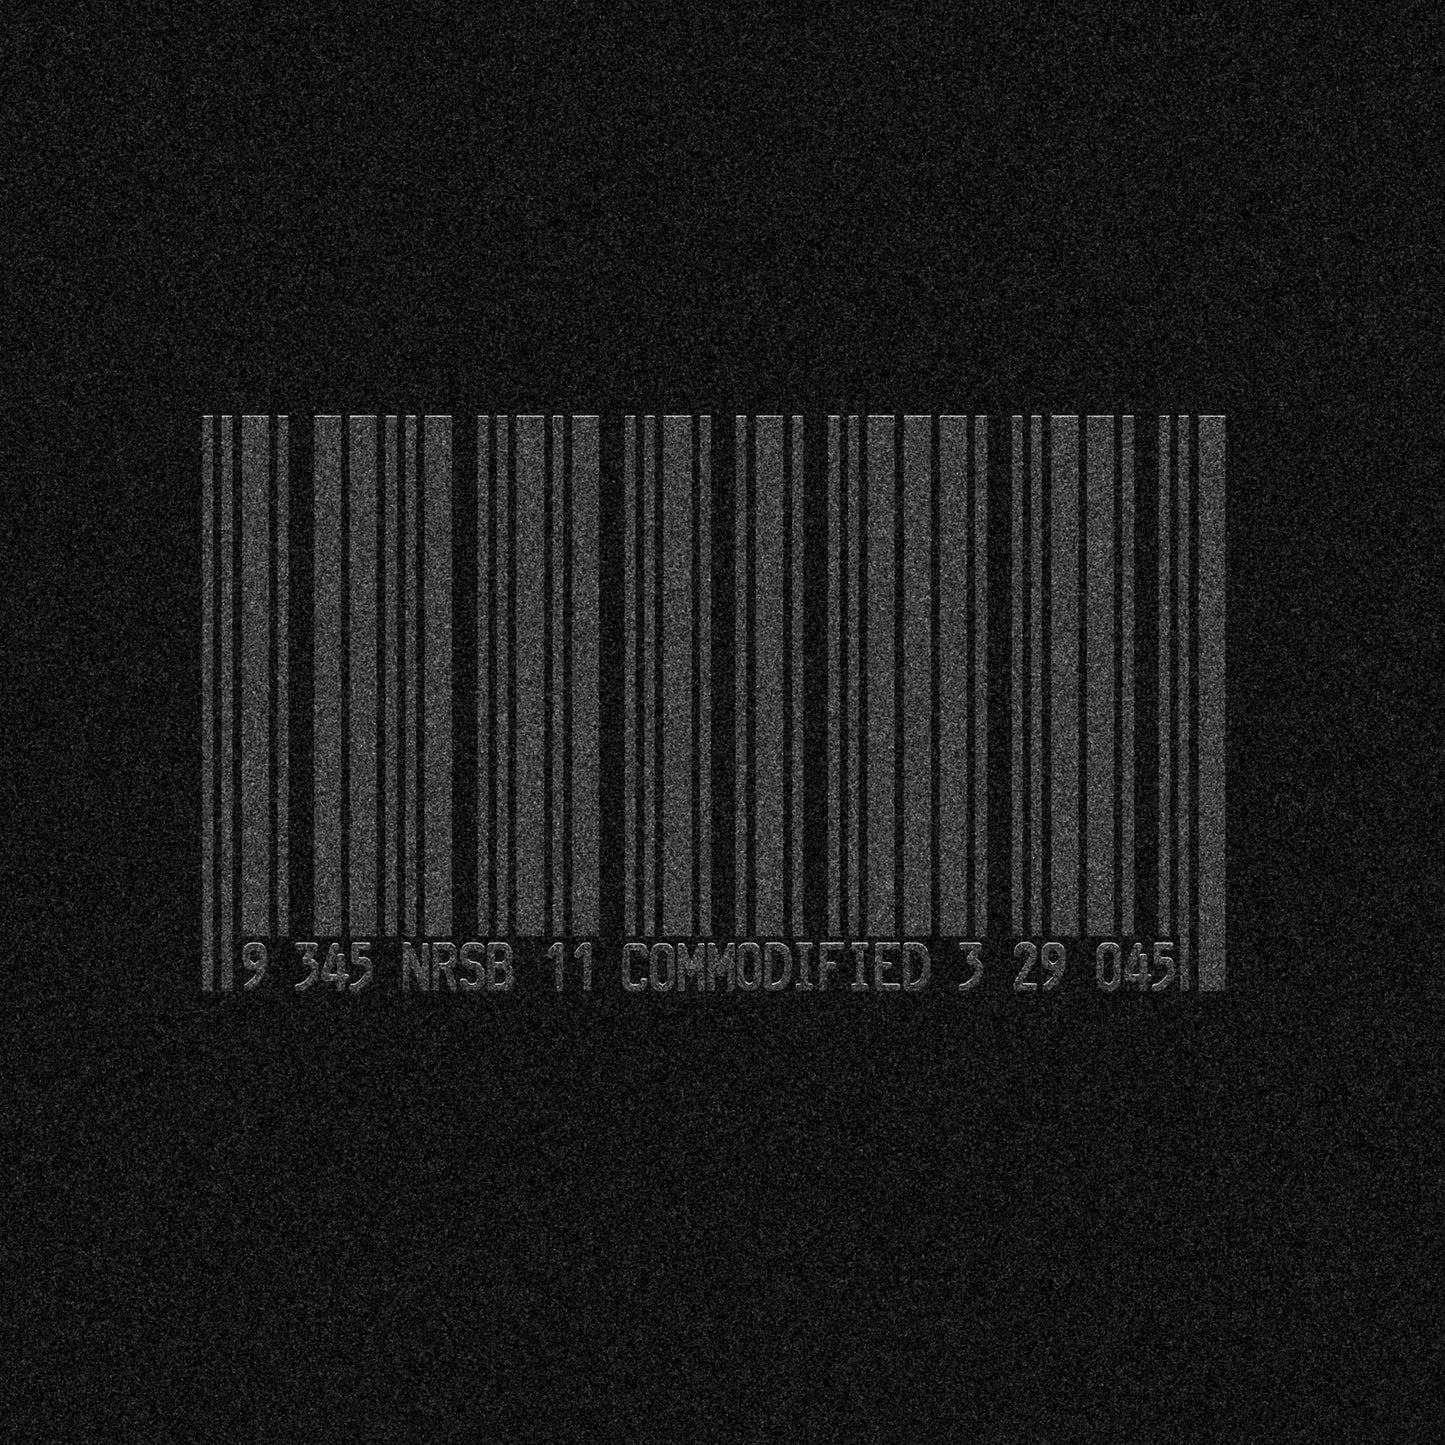 NRSB-11- Commodified | Buy the Vinyl LP from Flying Nun Records